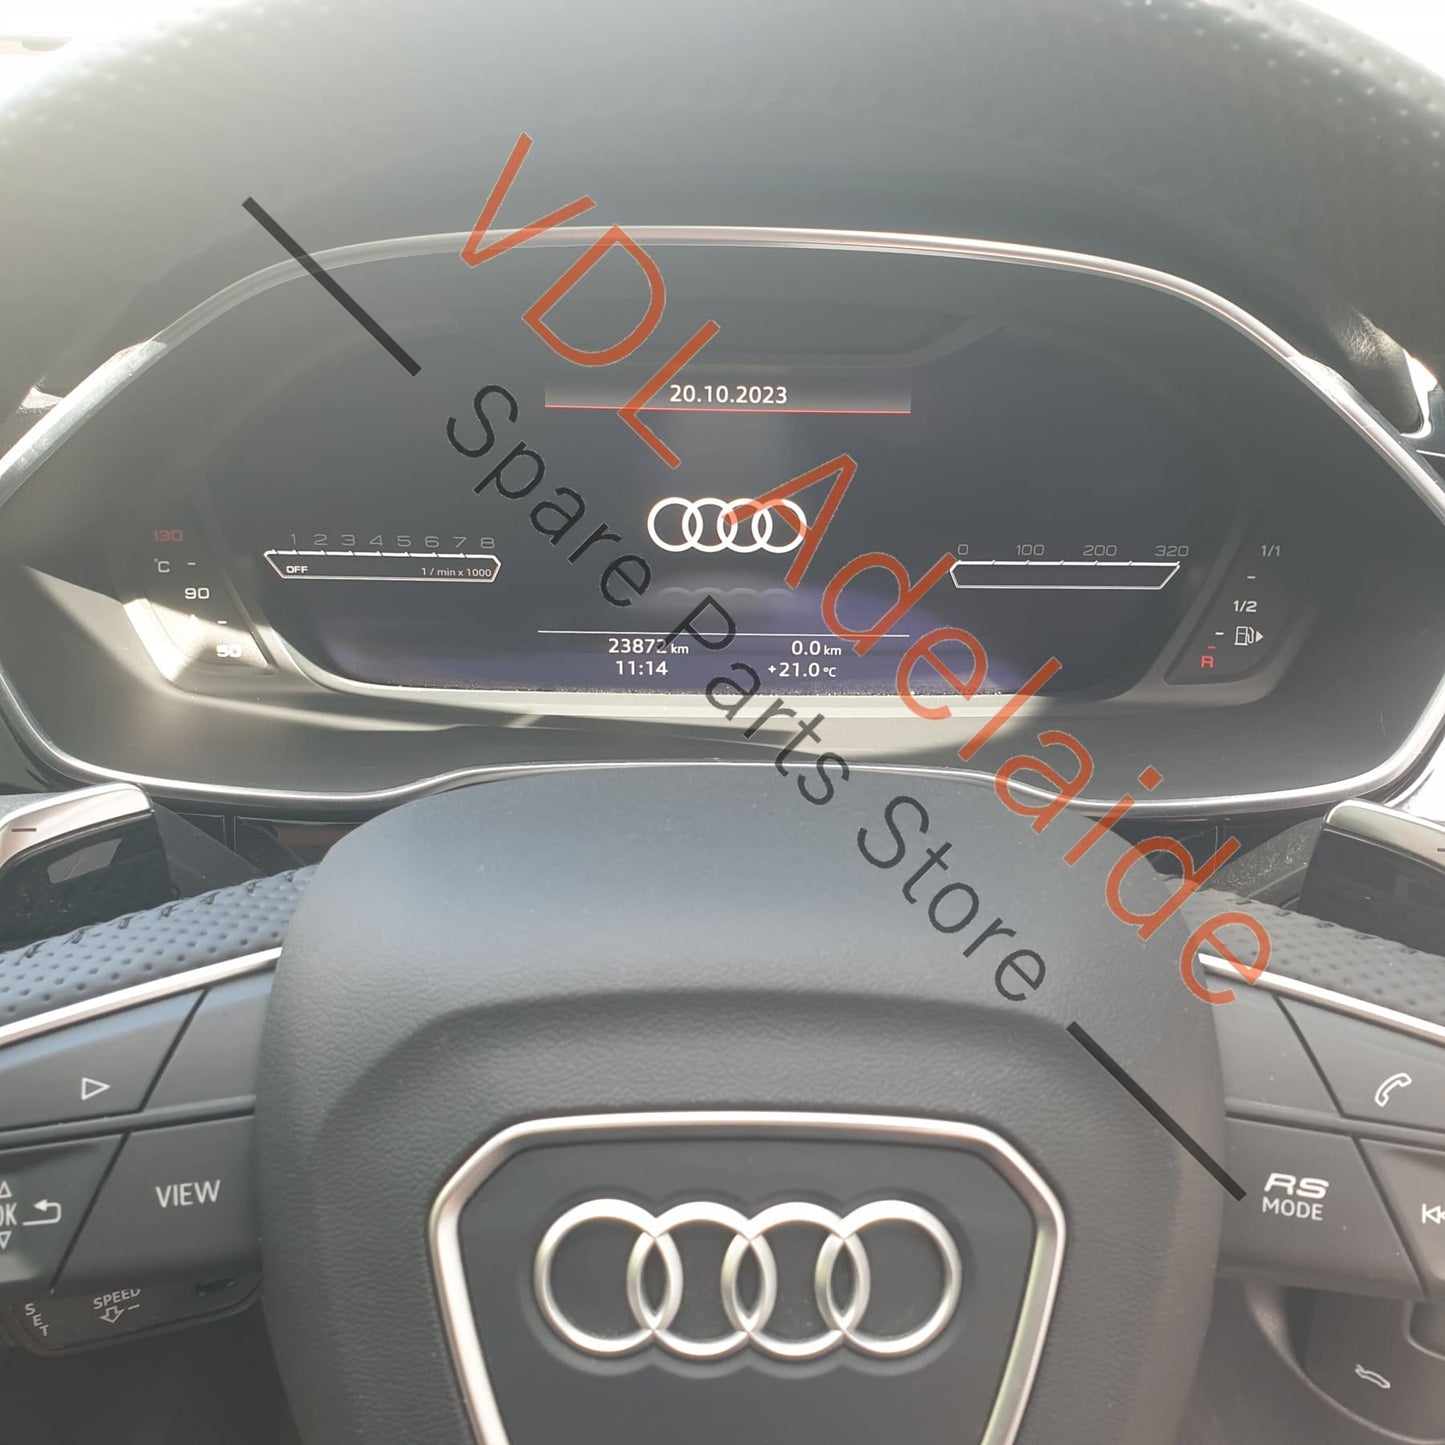 81A947135CF6PS 4K0959728A6PS 1A947135T6PS  Audi Q3 RSQ3 F3 Interior Dome Light with Sunroof Switch 81A947135T 6PS 81A947135CF 6PS